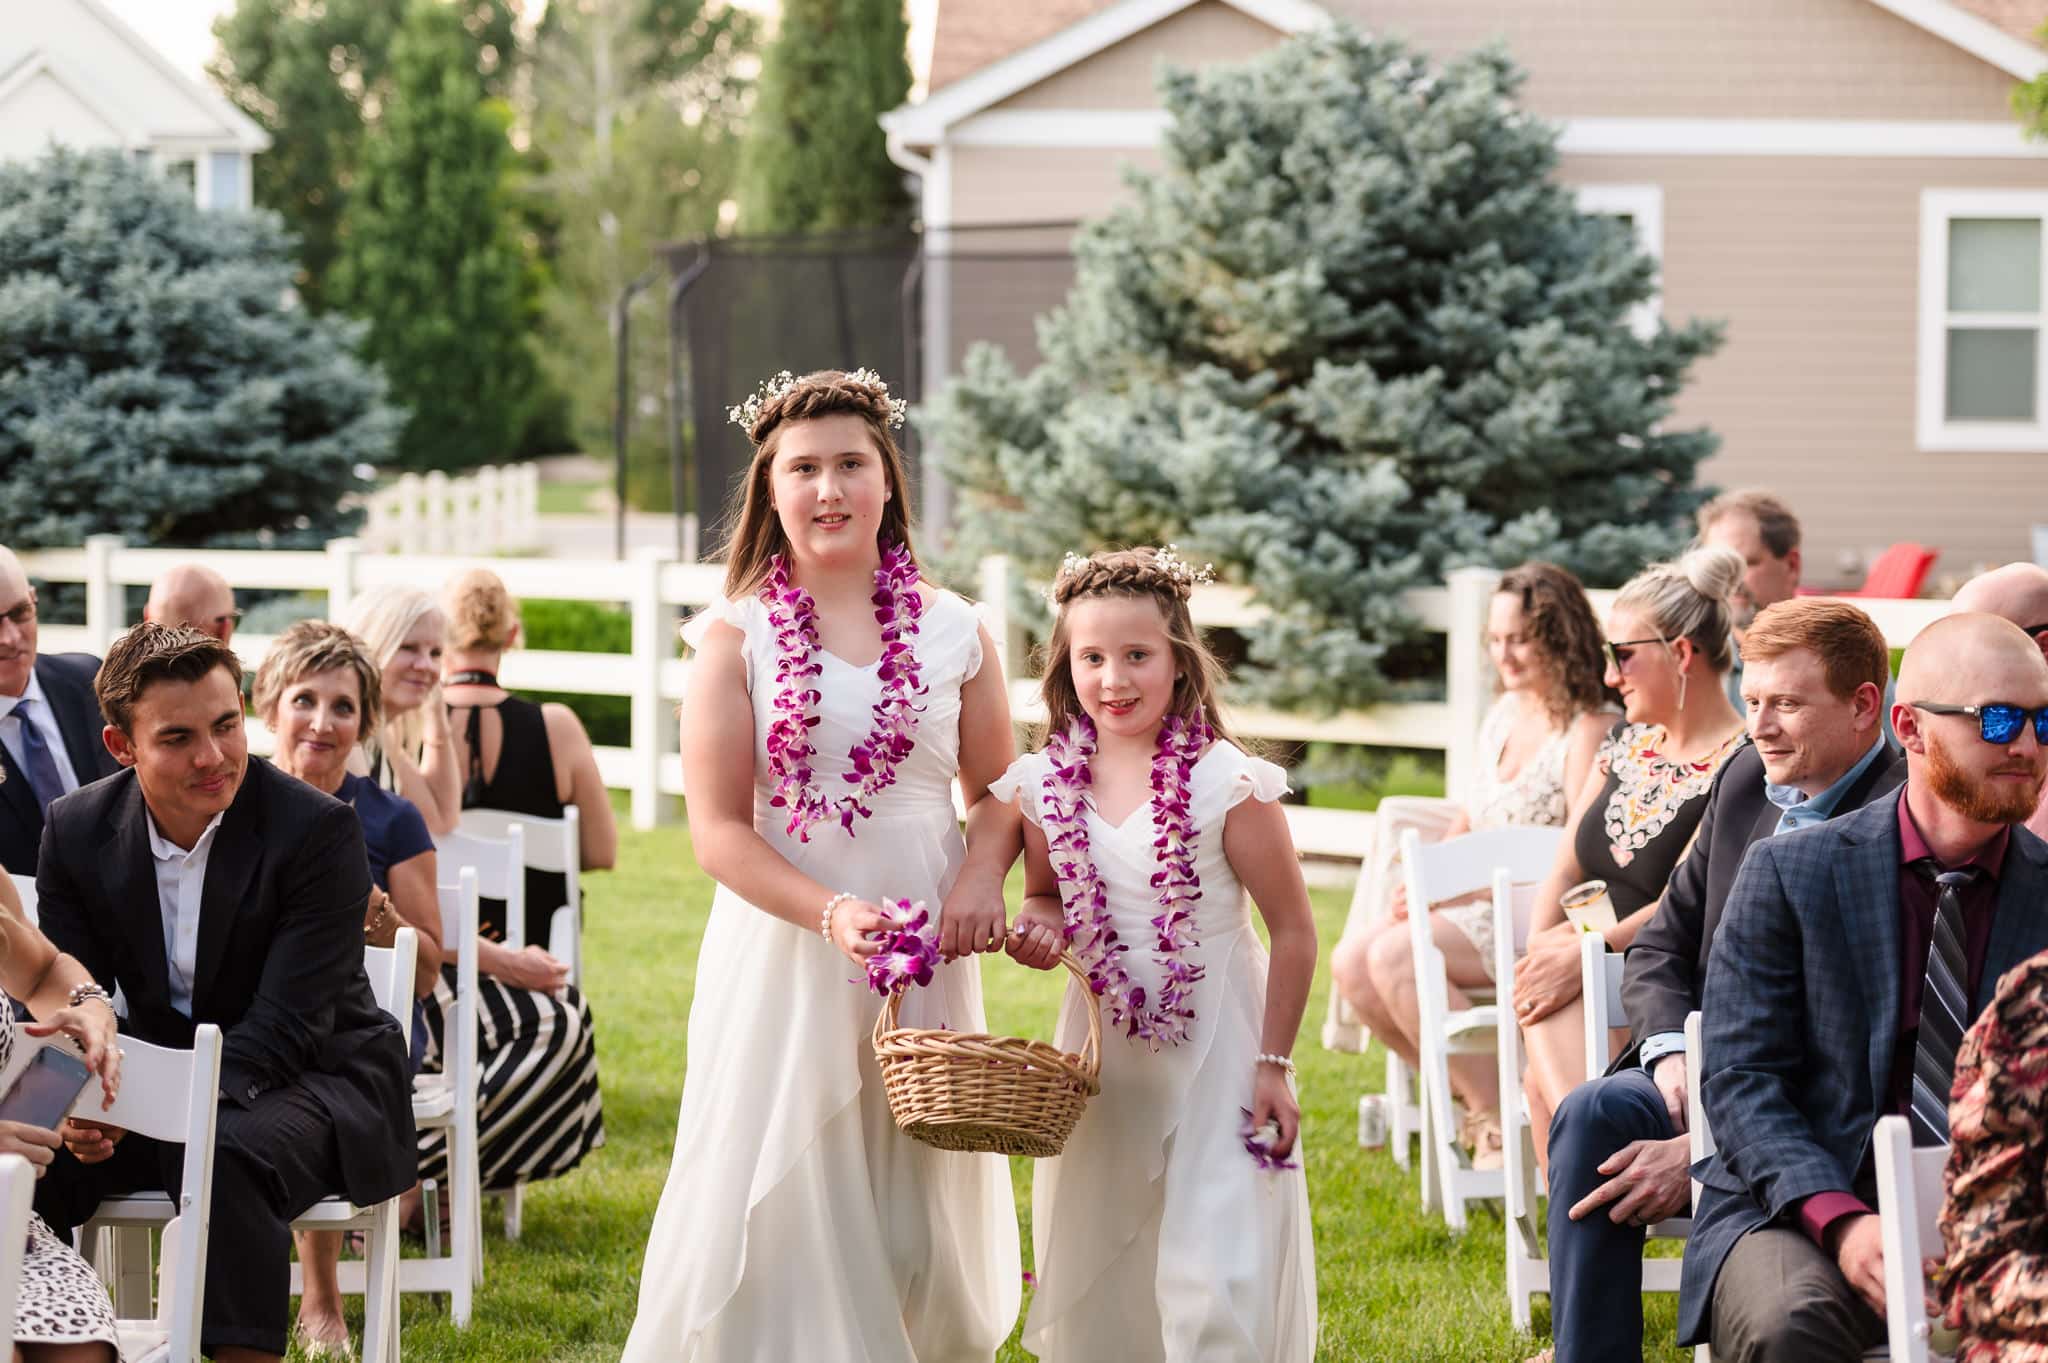 The flower girls wearing brightly colored leis walk down the wedding aisle with a basket and toss petals on the ground.